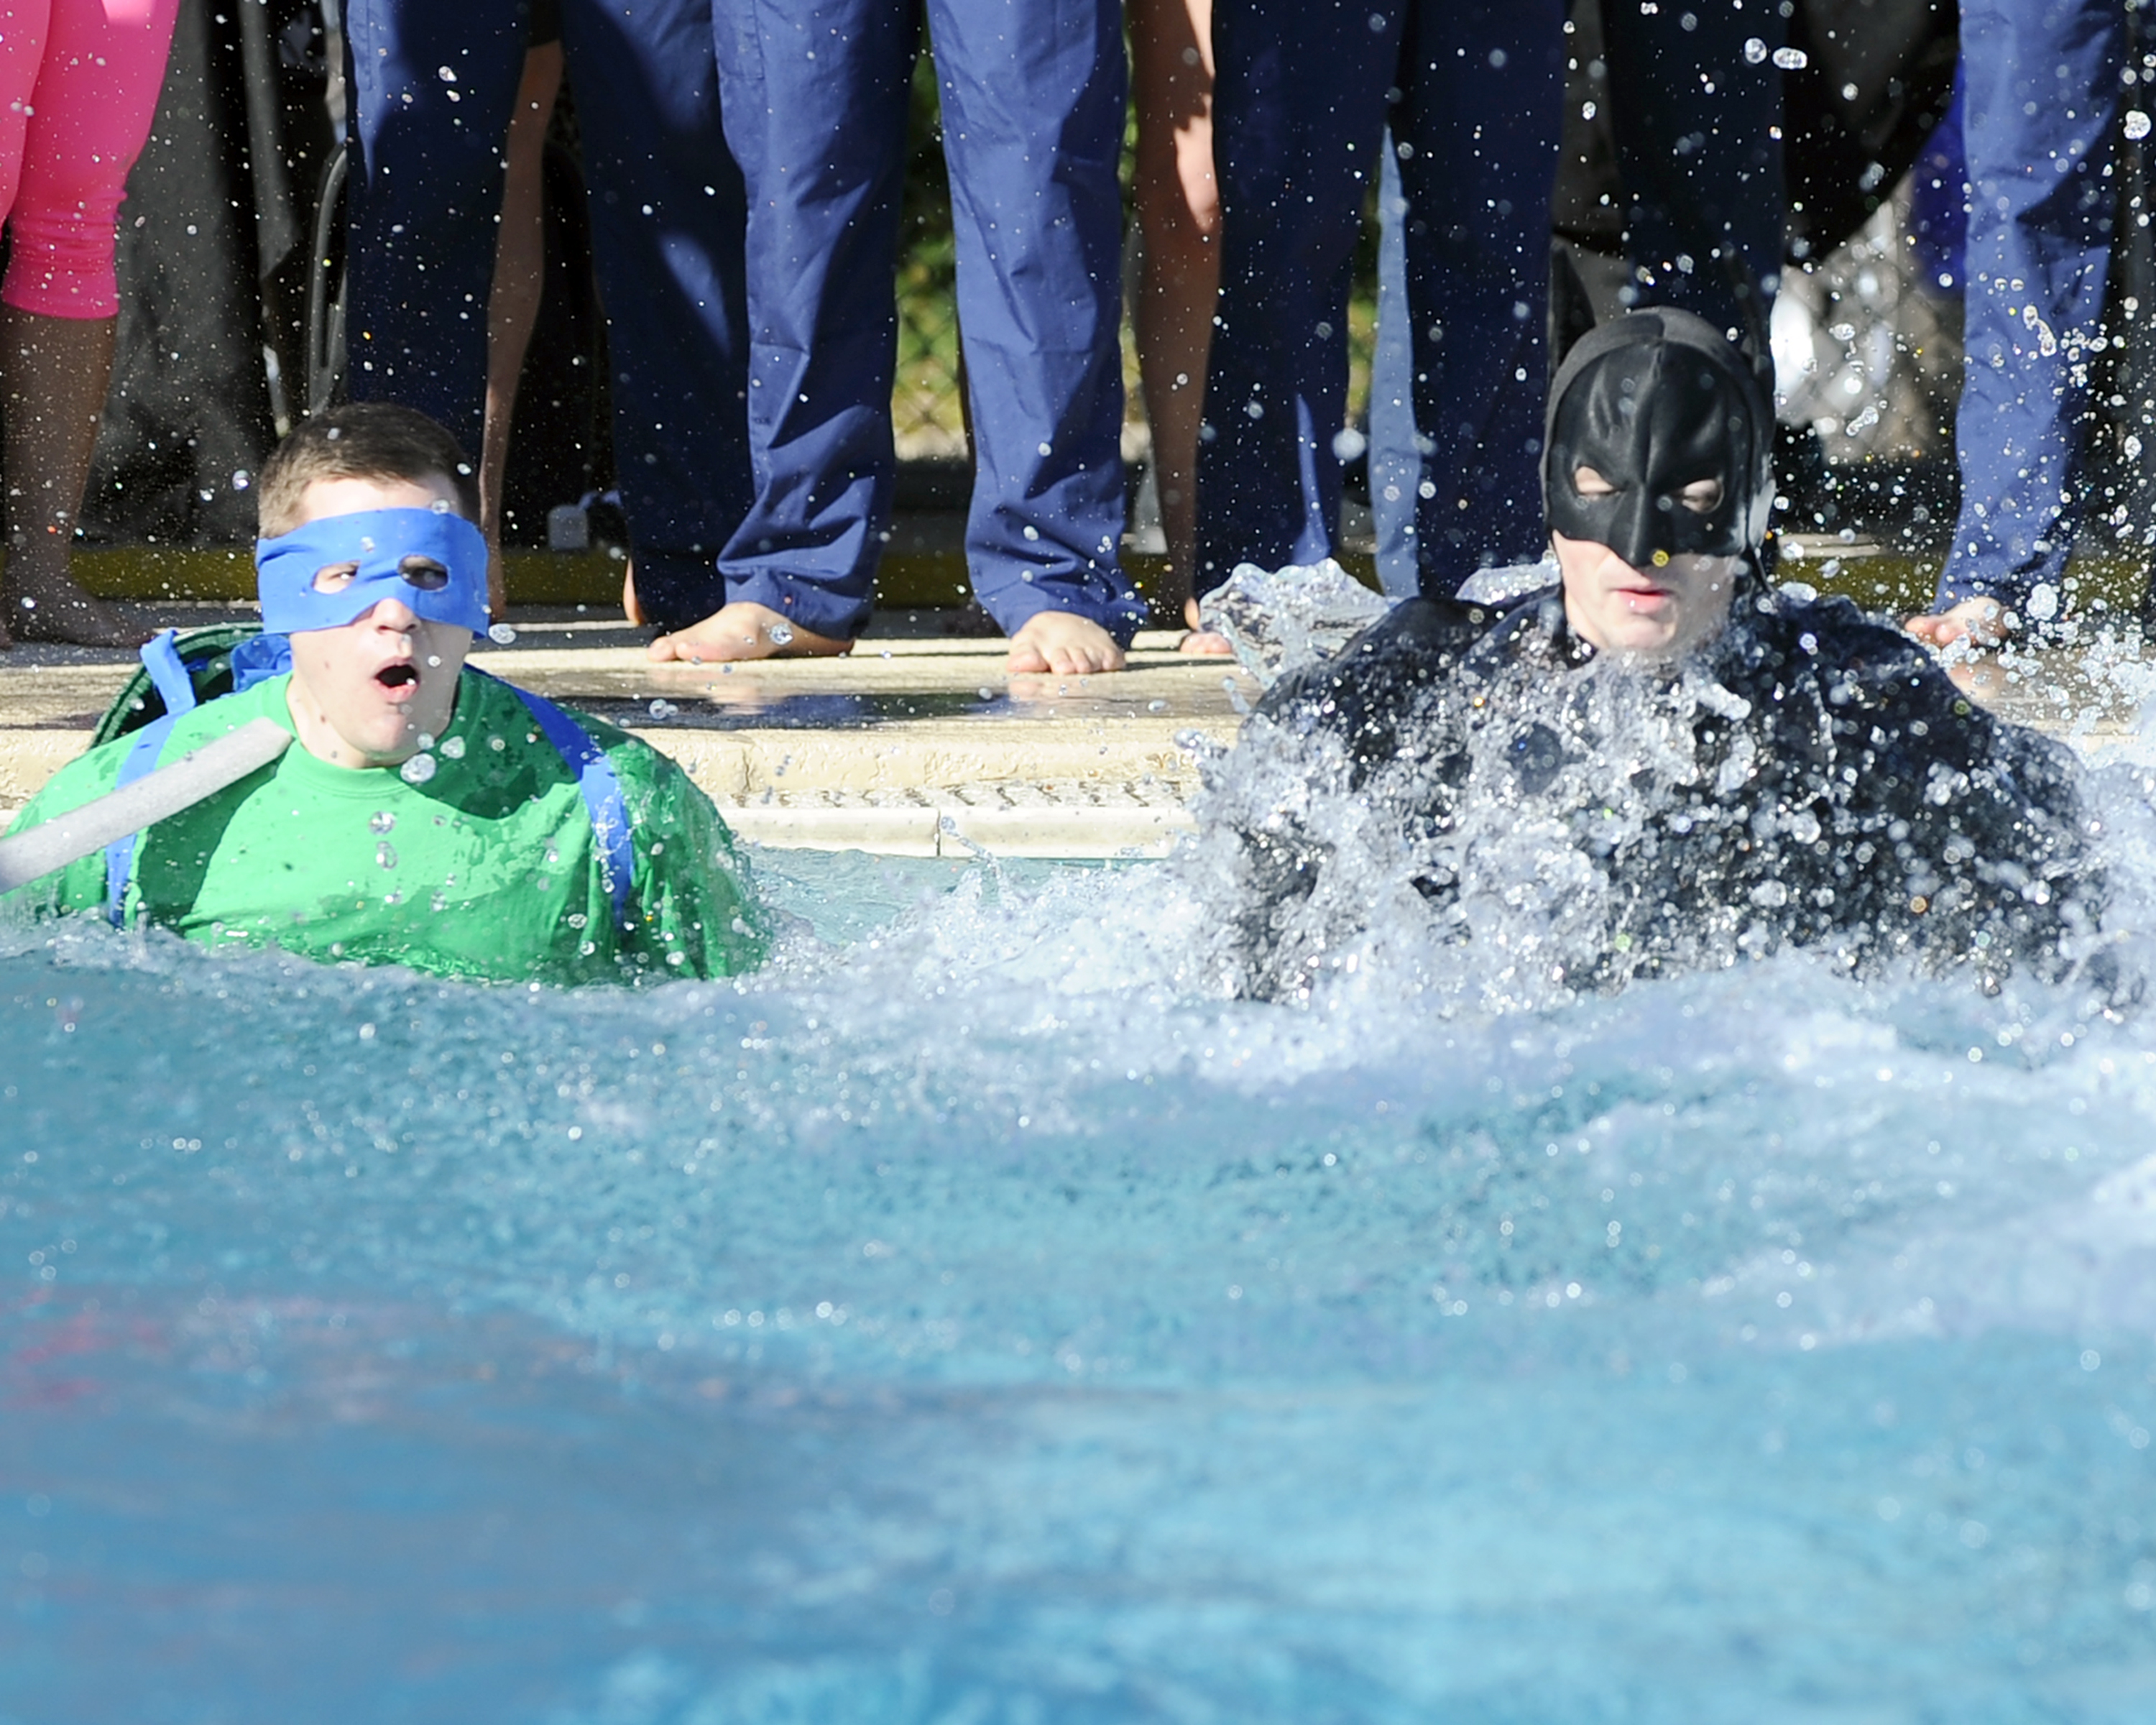 Eighth annual ‘Auburn Polar Plunge’ benefiting Lee County Special Olympics to be held Feb. 1